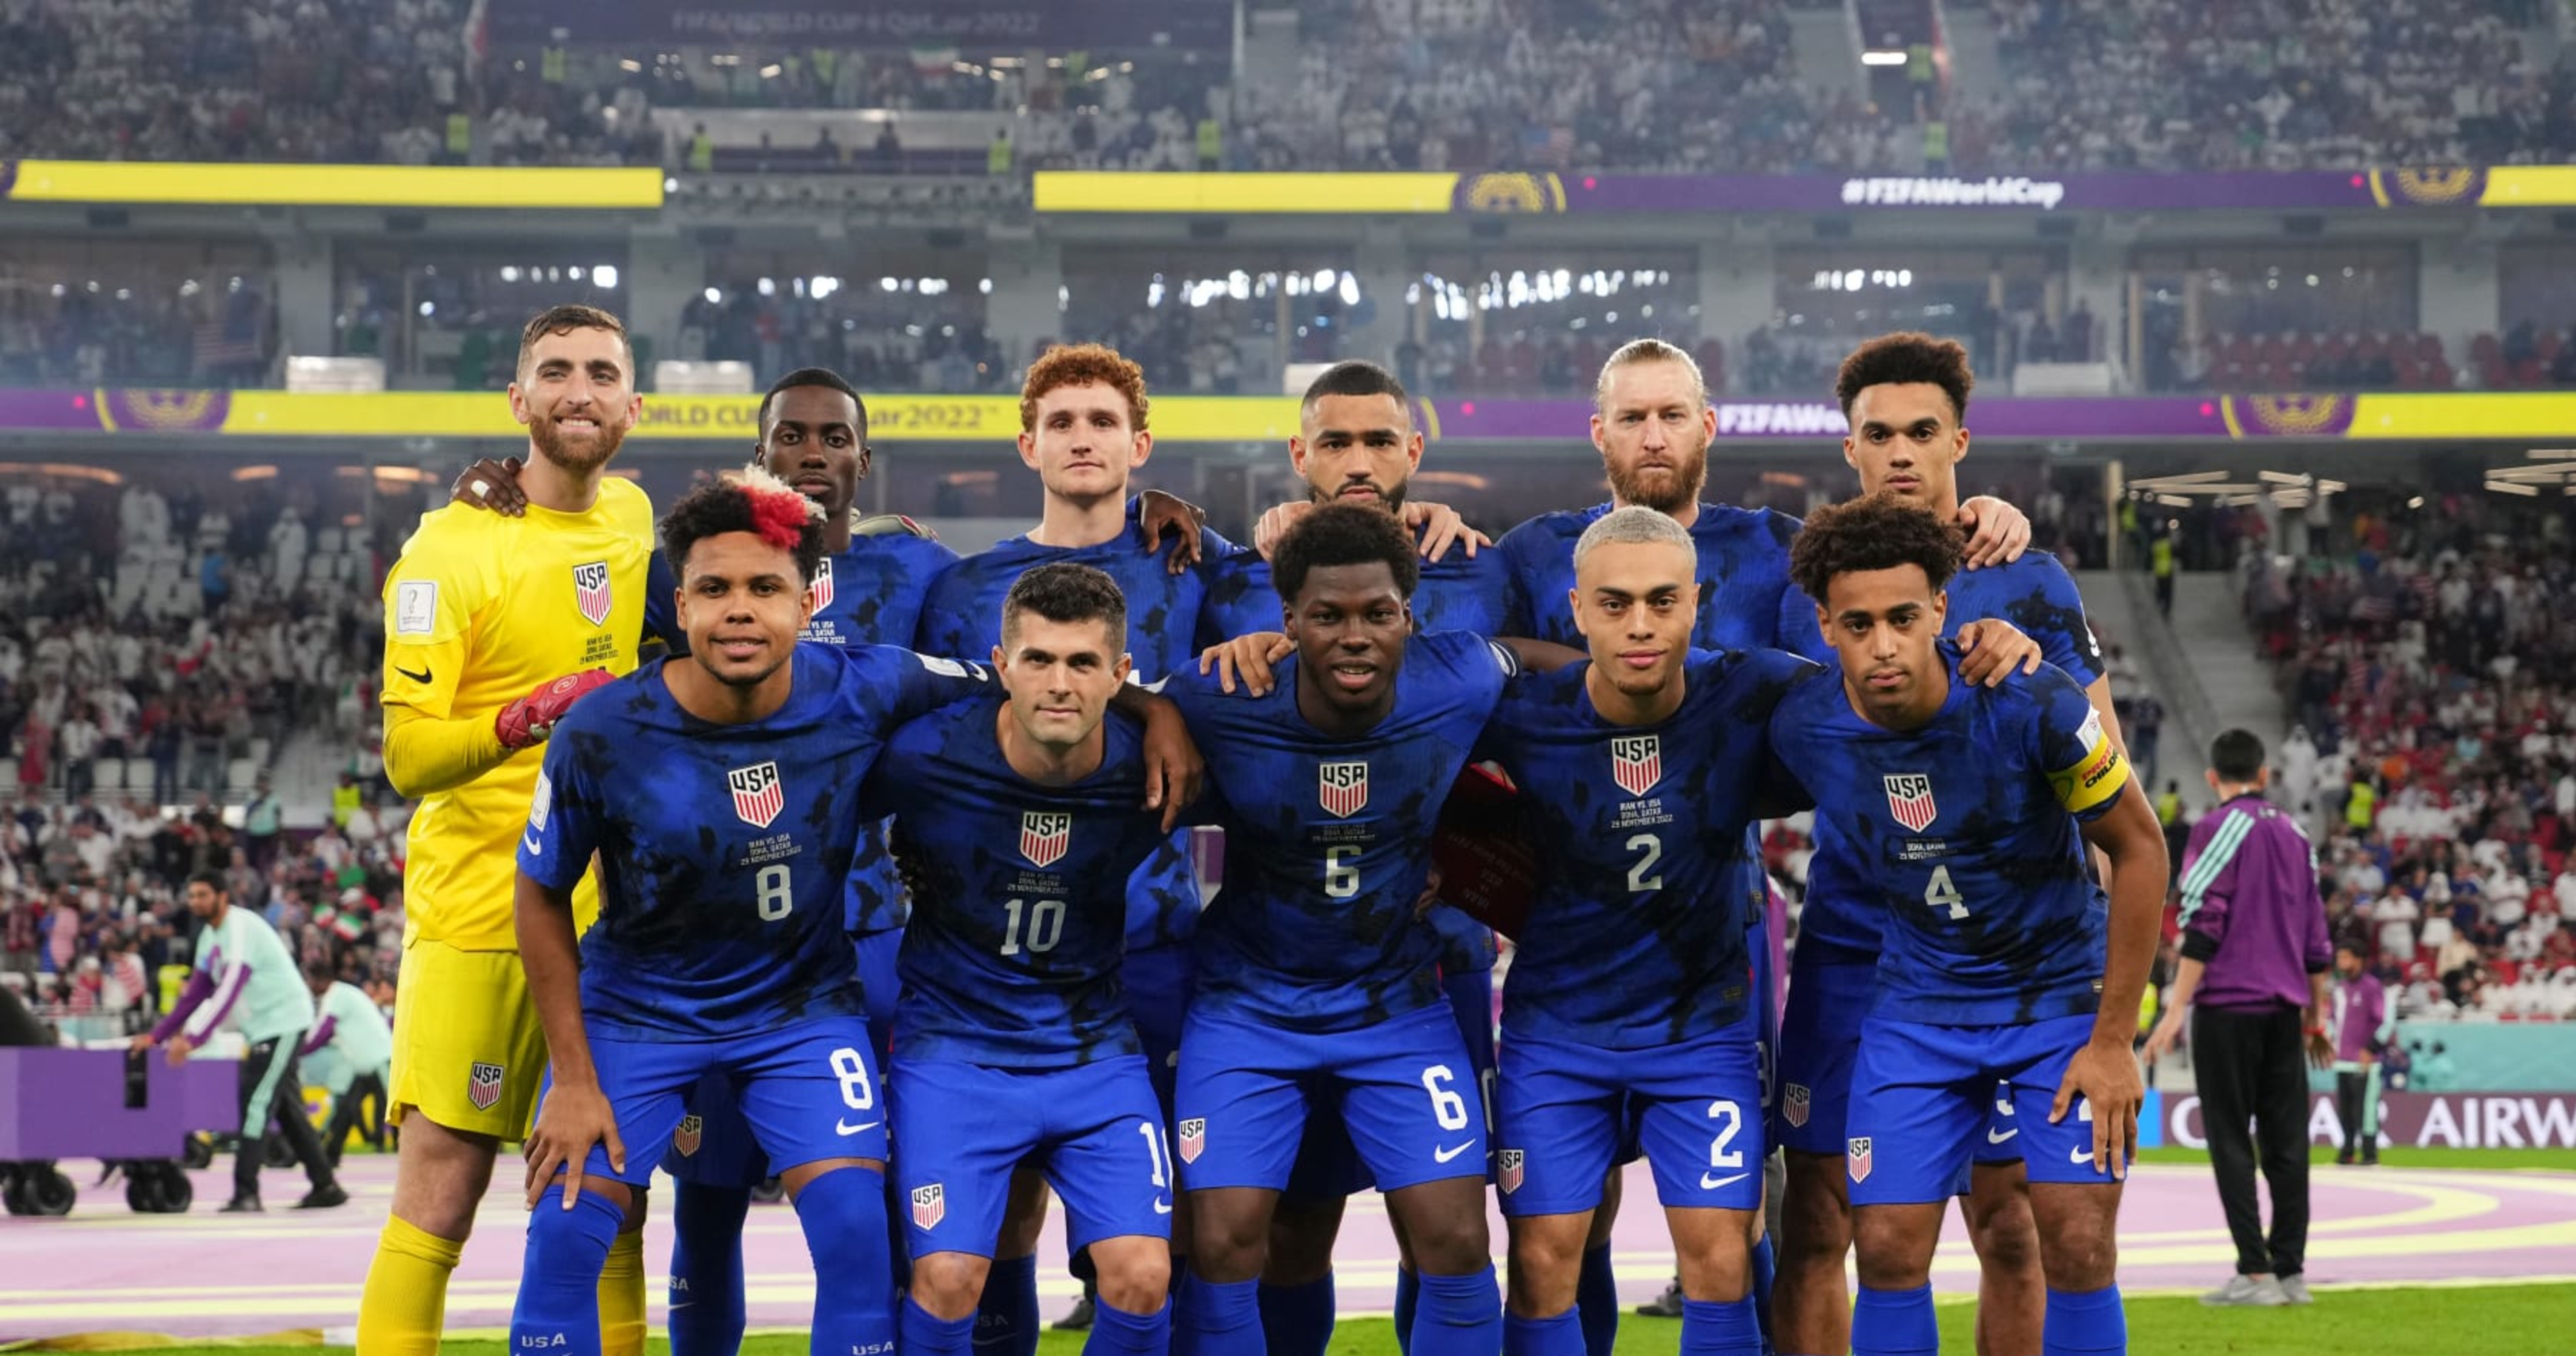 2022 Men's World Cup: 6 Takeaways from the USMNT's Win vs. Iran